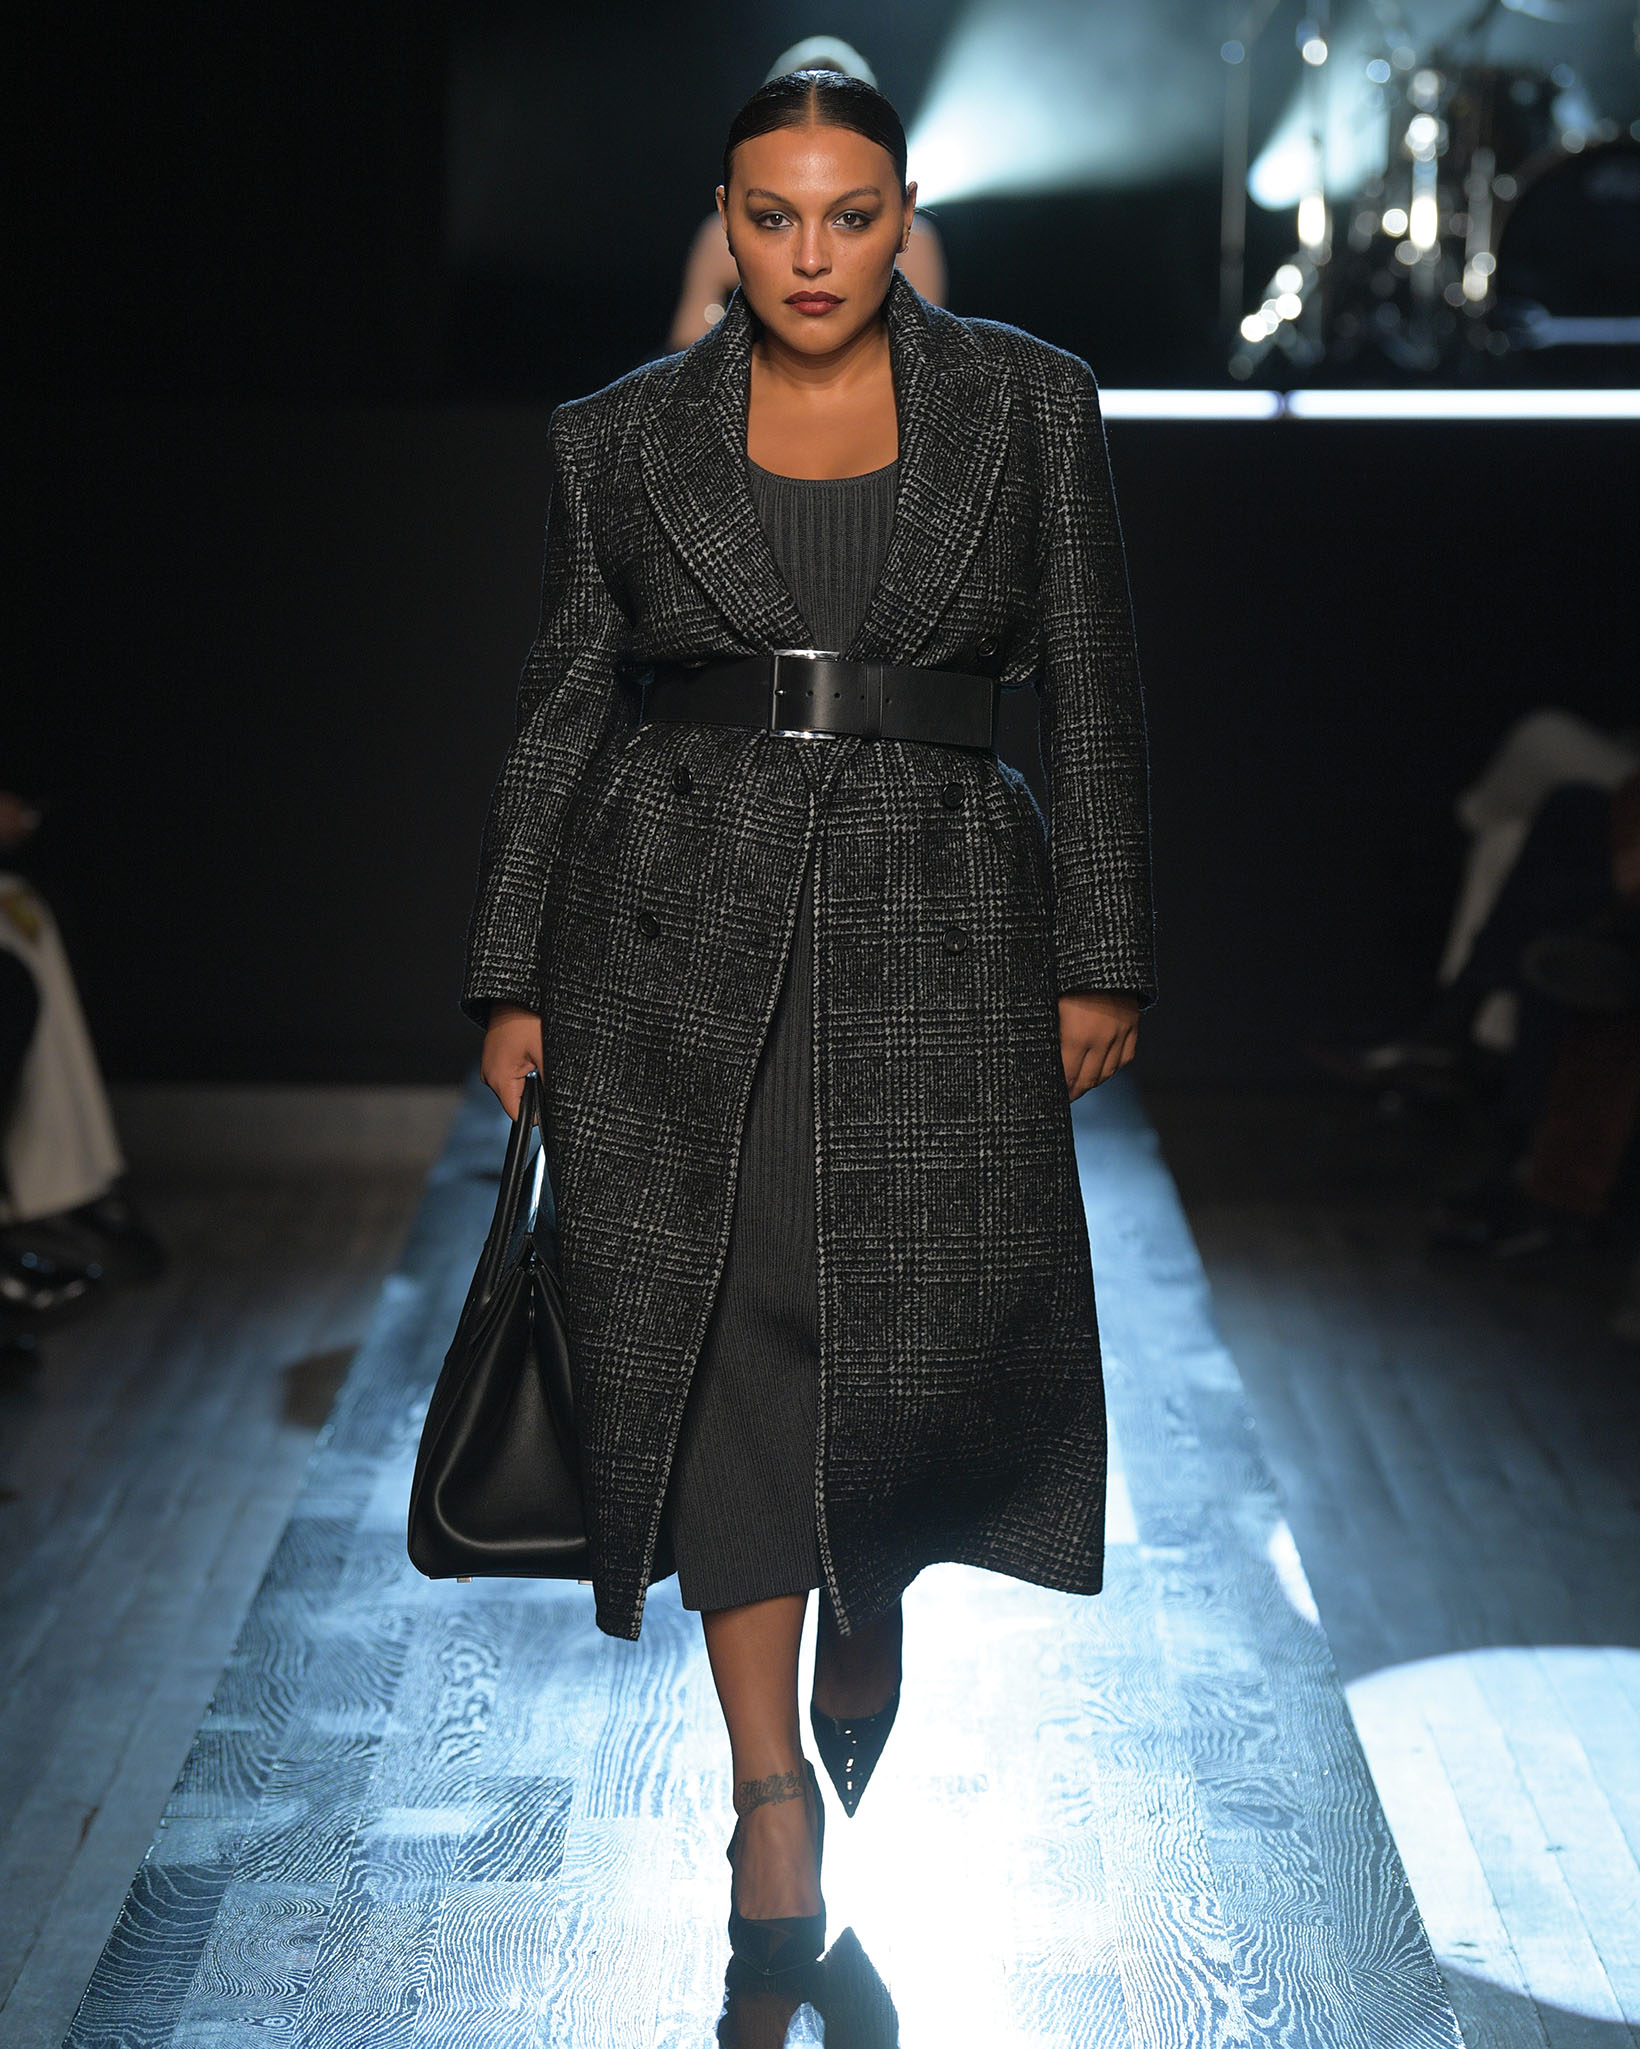 Michael Kors Collection At NYFW: An Ode To Nightlife And New York